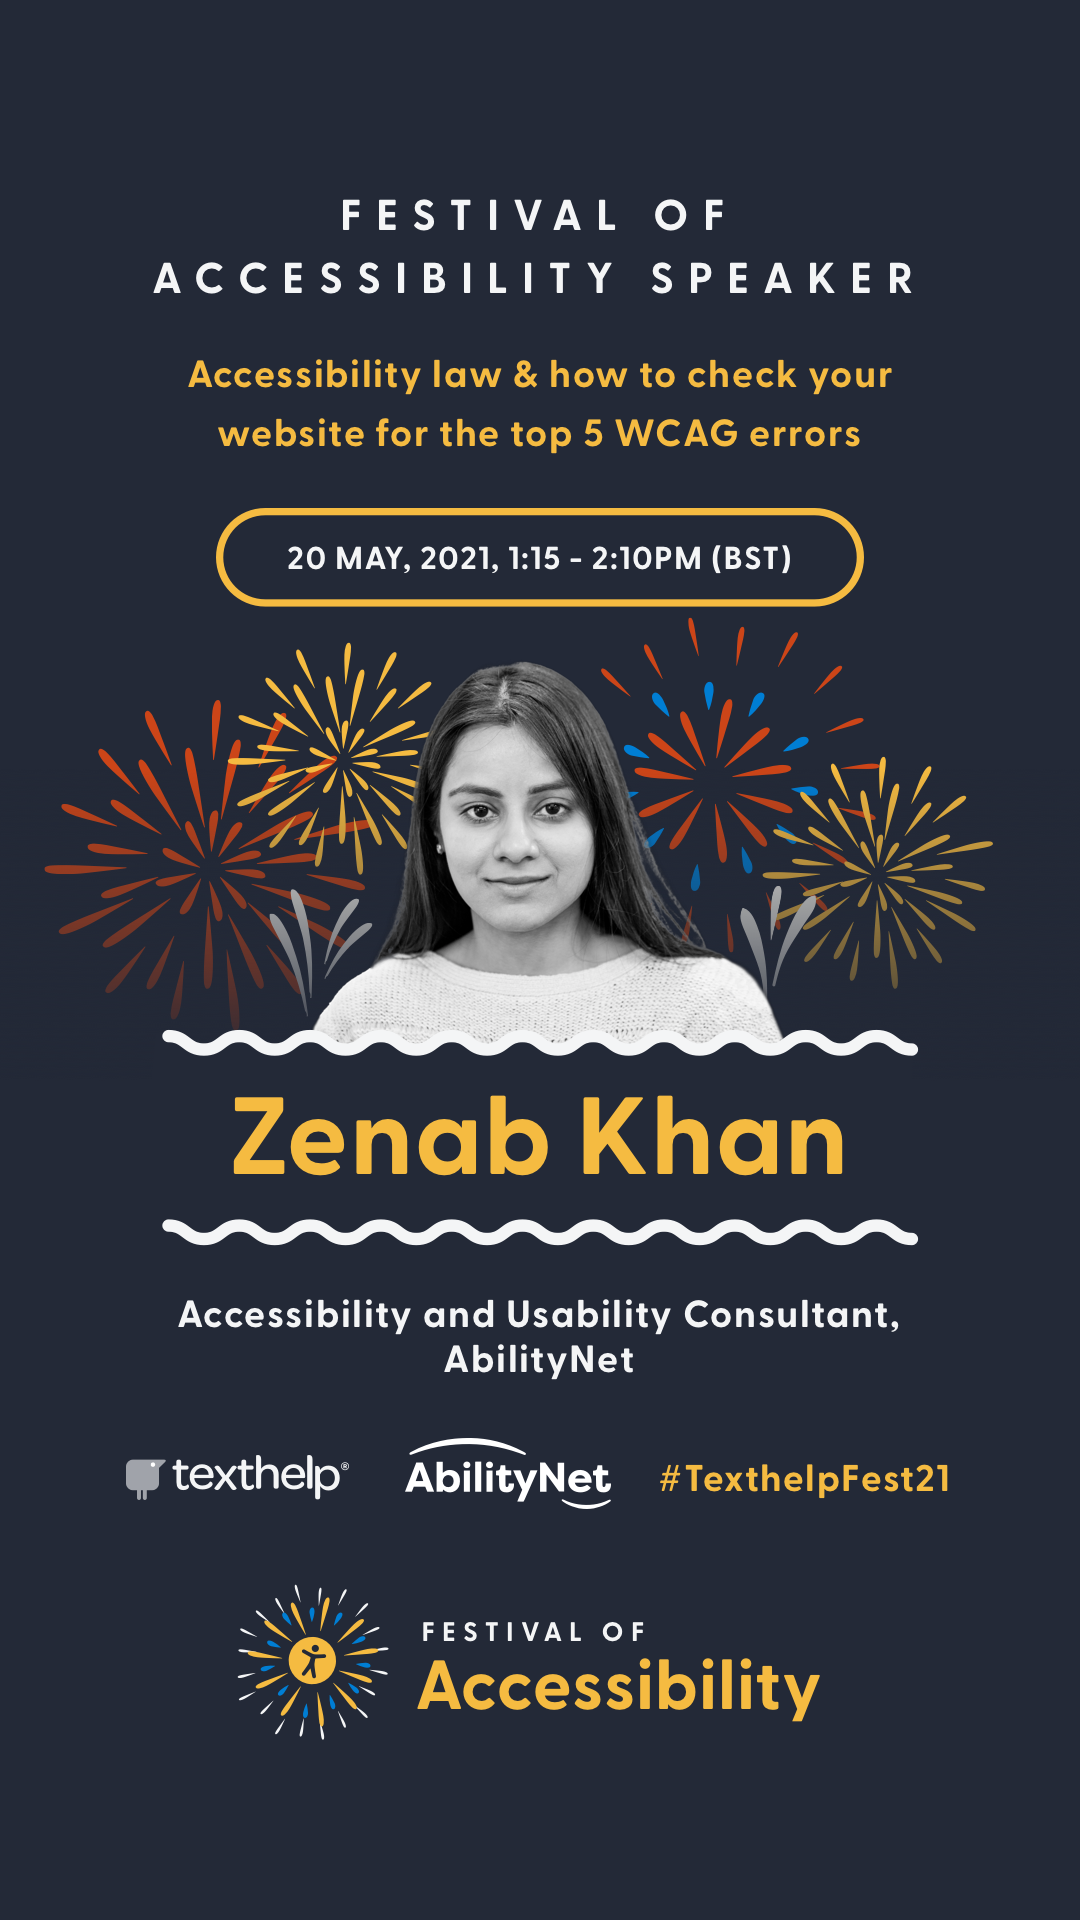 Accessibility law and how to check your website for the top 5 WCAG errors, 1.15 to 2.10pm includes image of Zenab Khan